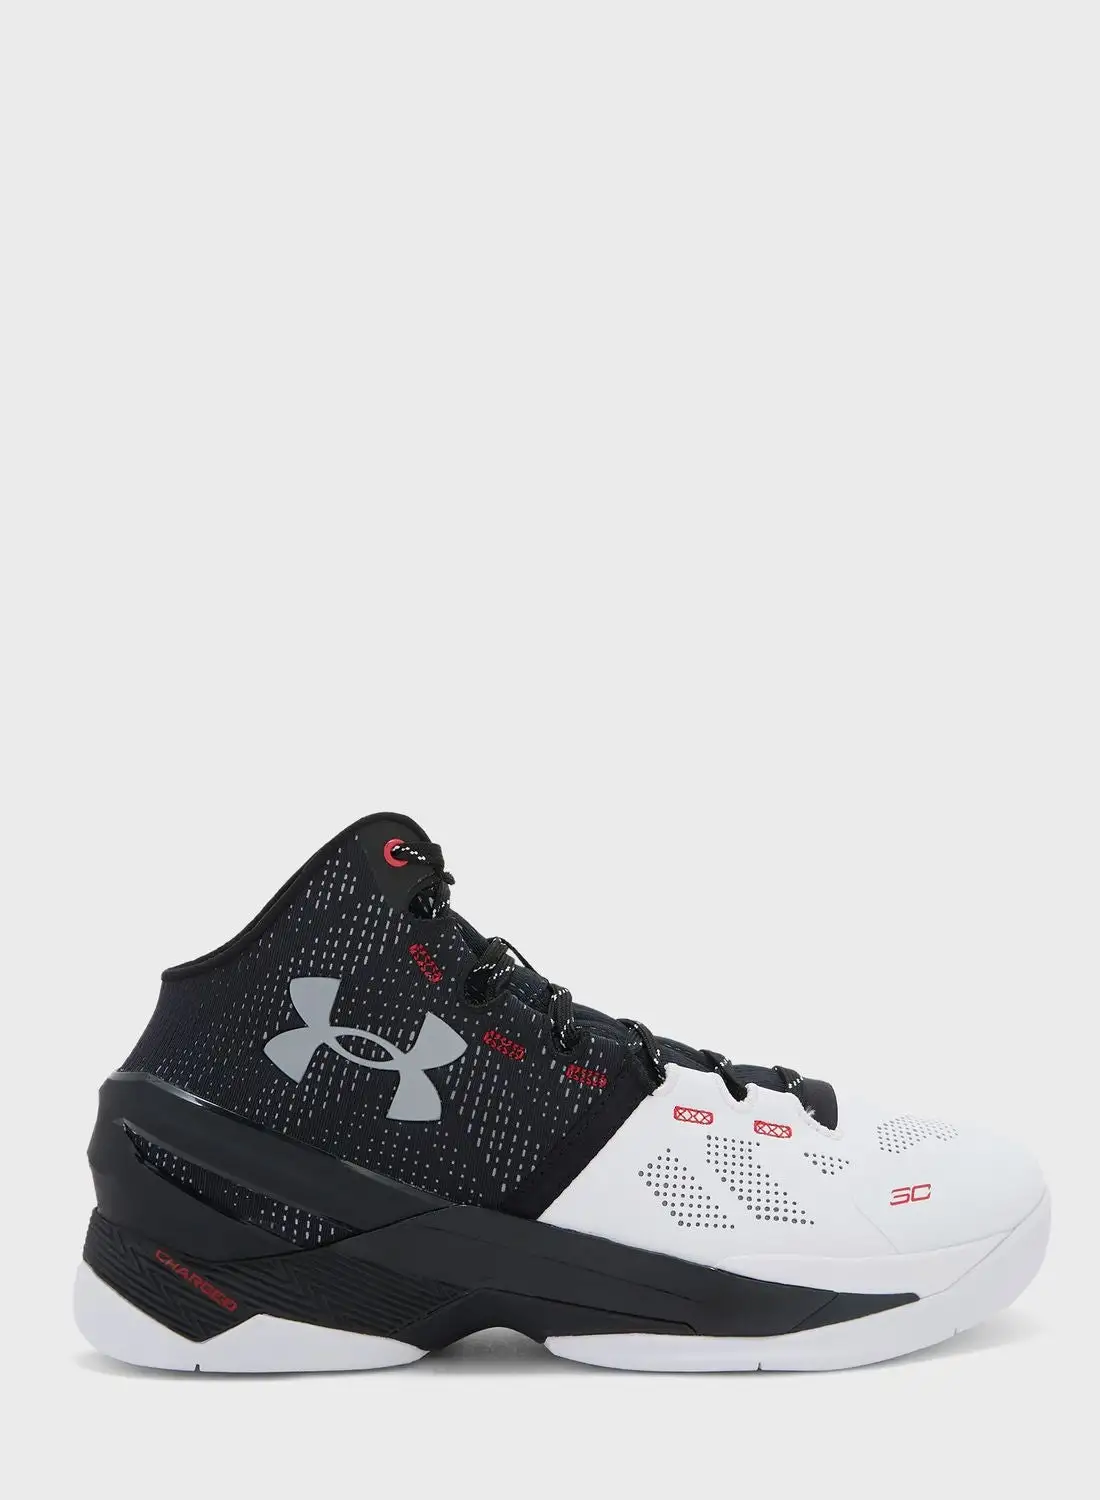 UNDER ARMOUR Curry 2 Nm Sneakers